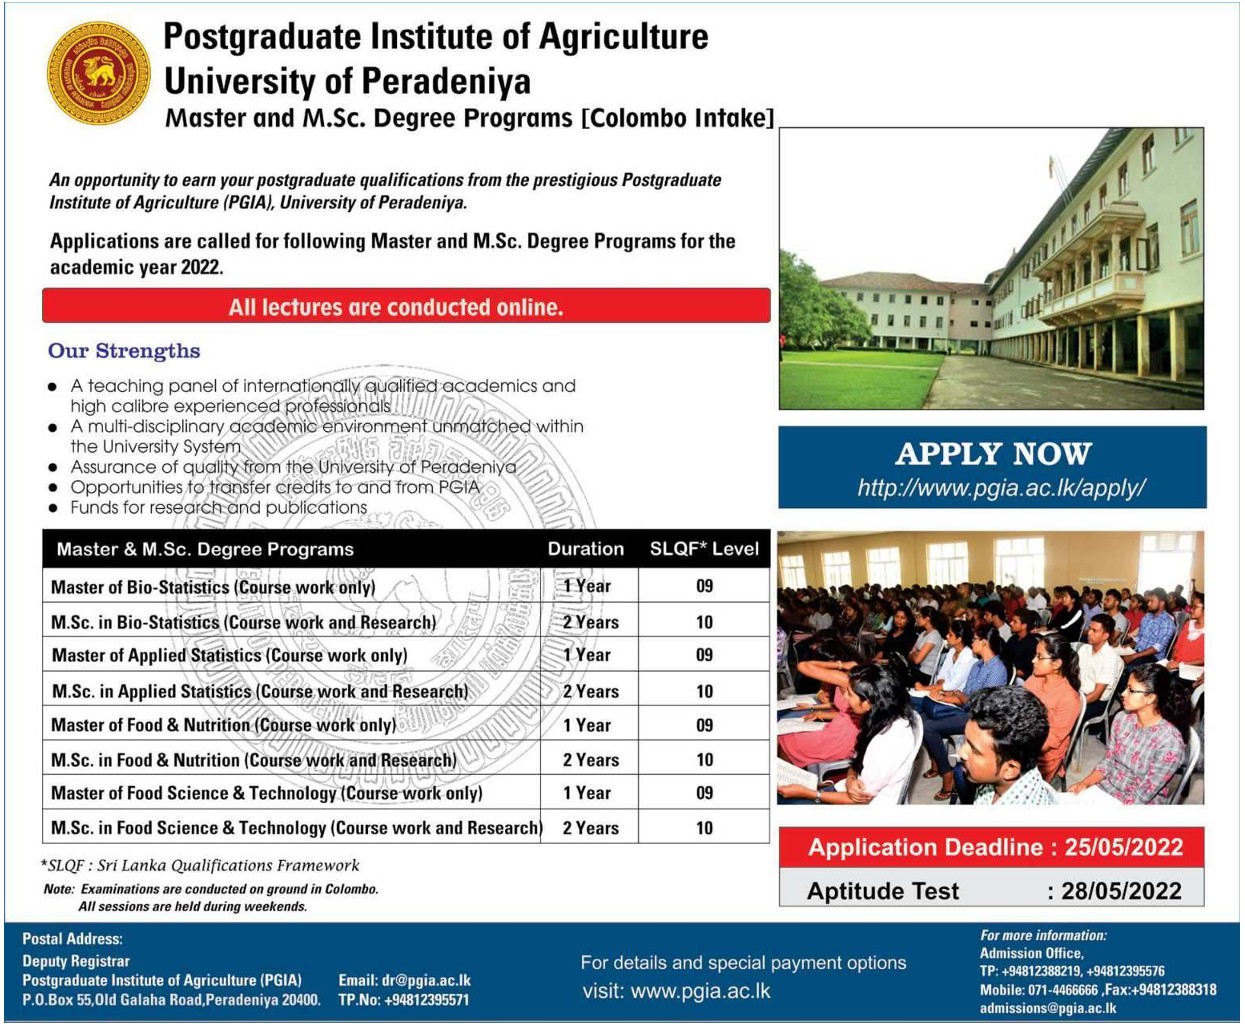 Master and M.Sc. Degree Programmes 2022 - Institute of Agriculture - University of Peradeniya Courses